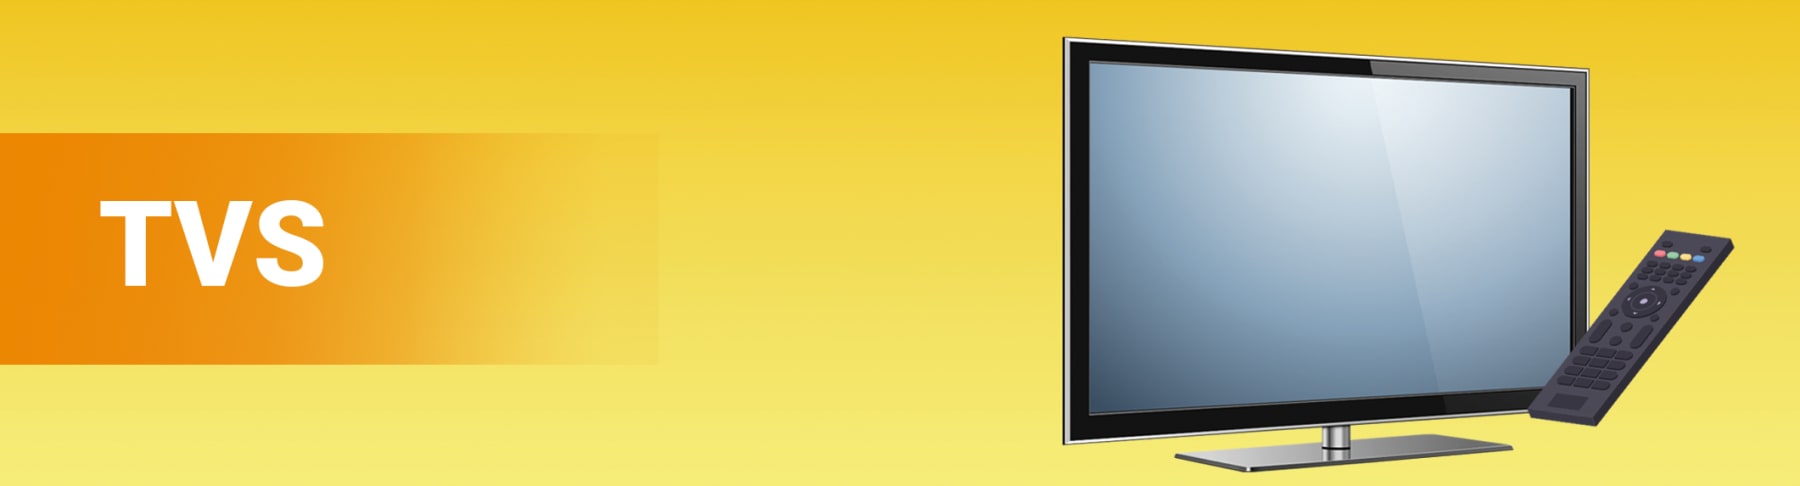 An HDTV and remote on a yellow background, with TVs text on the left side.